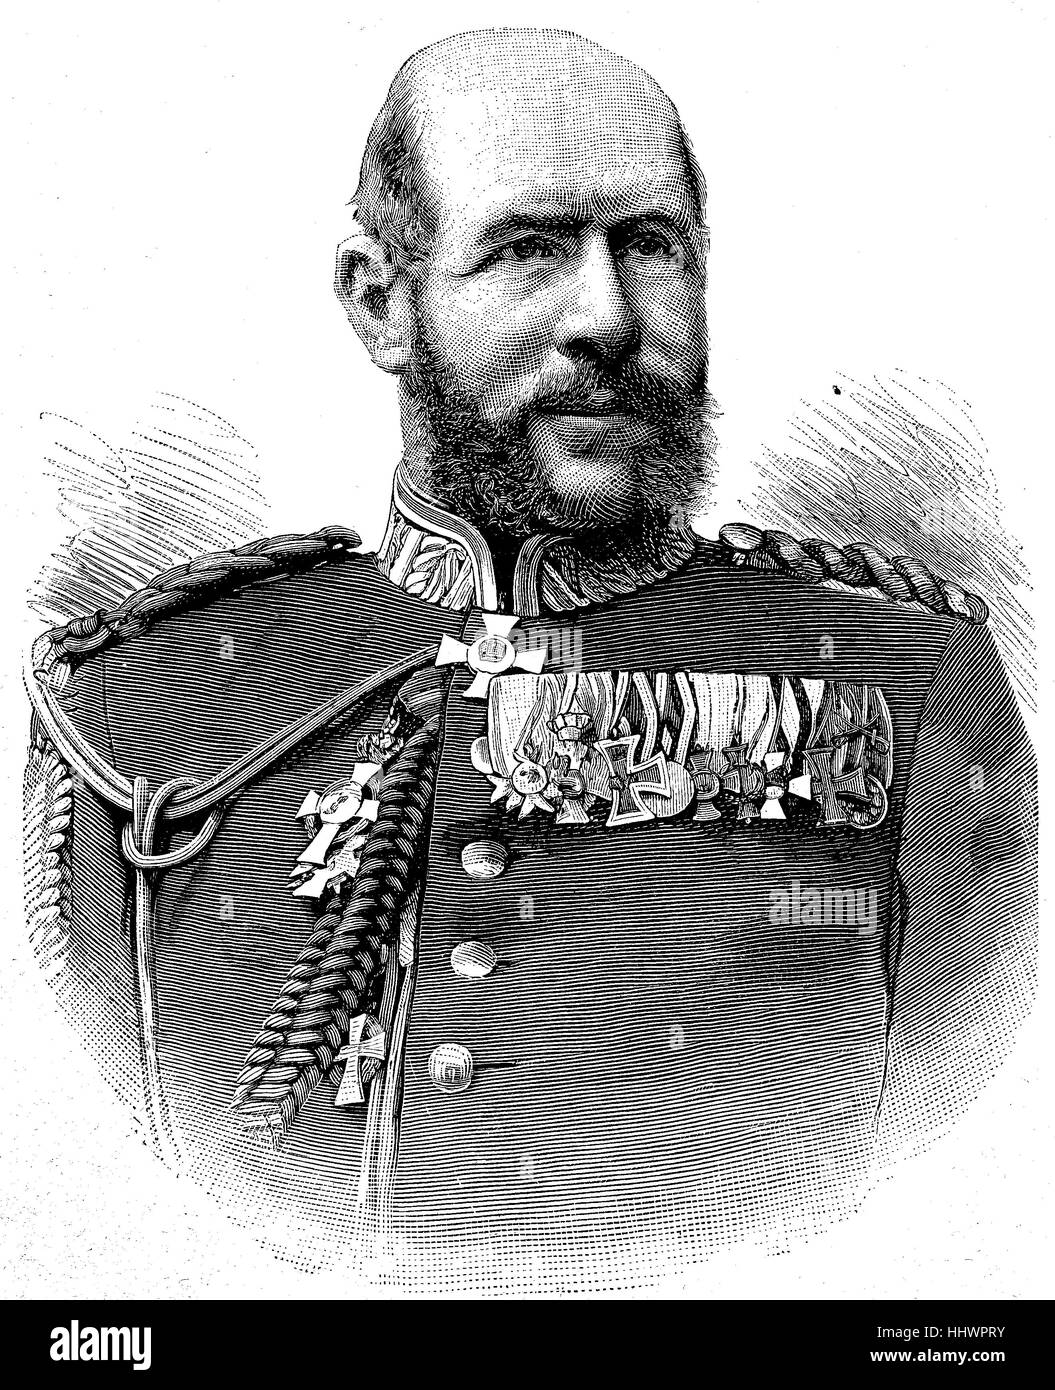 Adolph Freiherr von Asch zu Asch auf Oberndorff, October 30, 1839 - February 18, 1906, was a Bavarian Lieutenant General and War Minister from June 5, 1893 to April 4, 1905, historical image or illustration, published 1890, digital improved Stock Photo